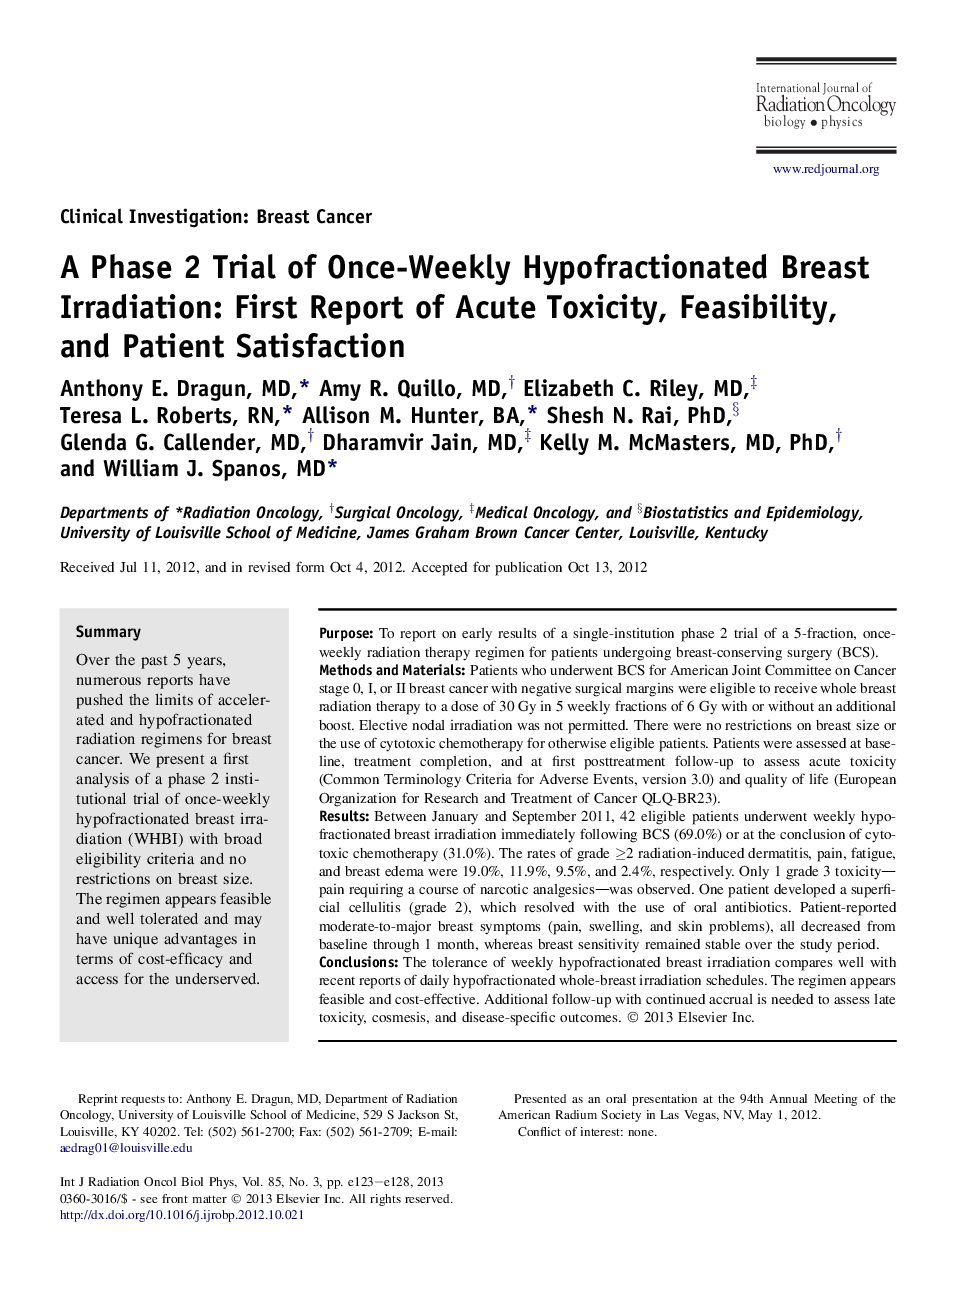 A Phase 2 Trial of Once-Weekly Hypofractionated Breast Irradiation: First Report of Acute Toxicity, Feasibility, and Patient Satisfaction